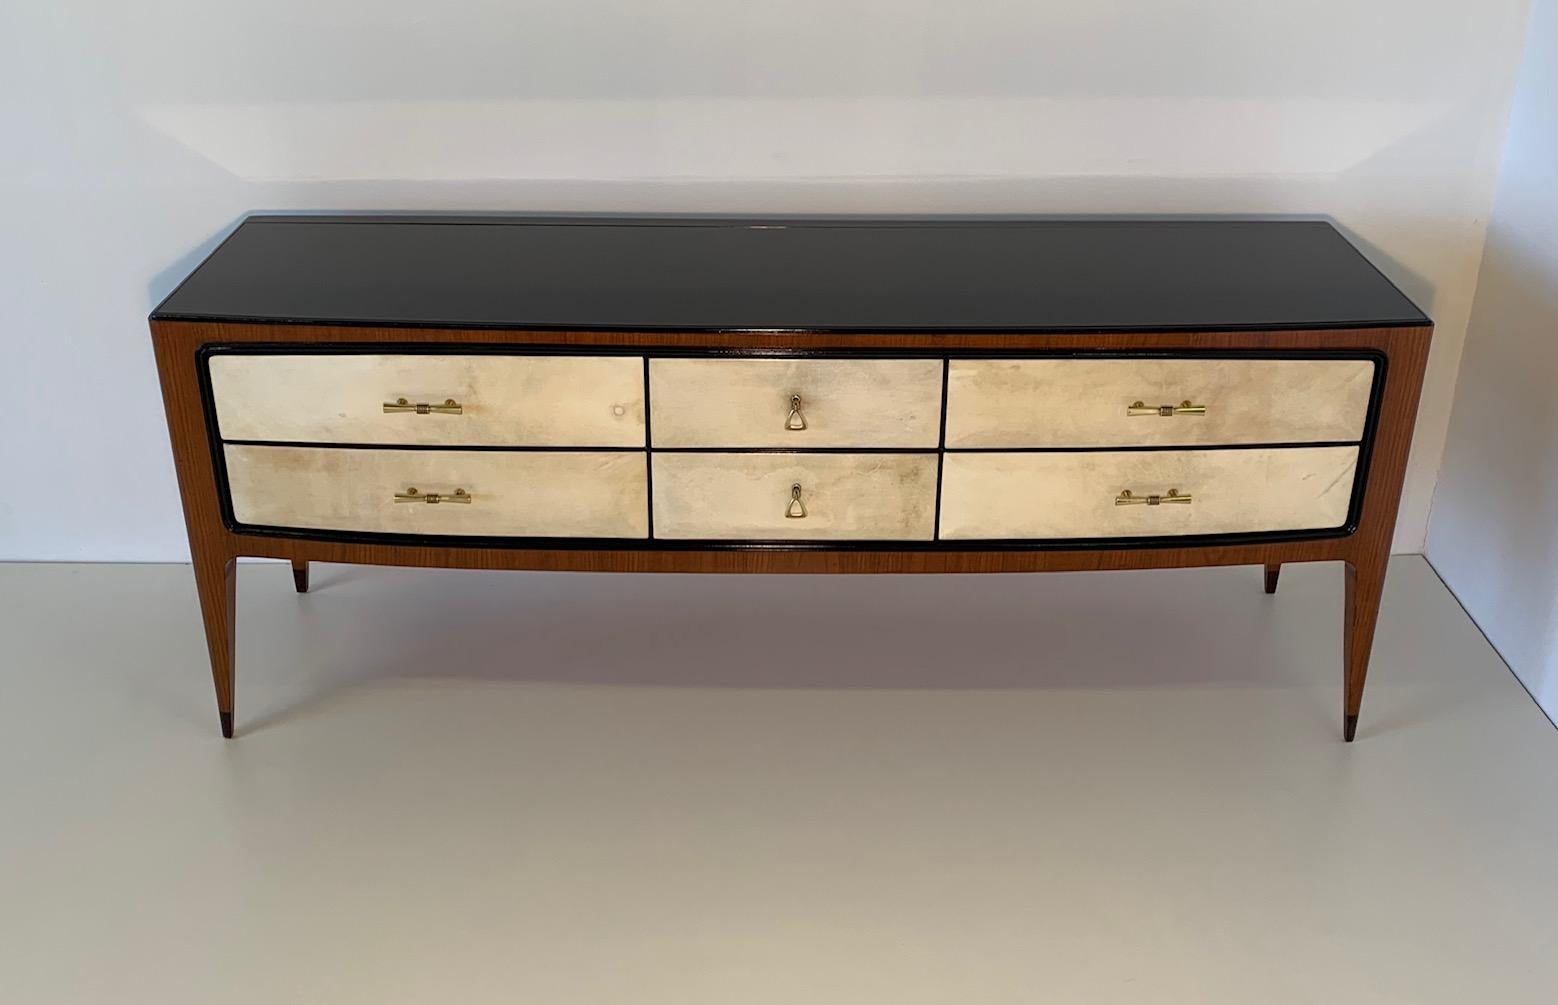 This dresser from the 1950s was made in Italy in walnut with fronts of the drawers in fine parchment leather.
Ebonized wood profiles and black glass top.
Brass handles and keys.
Completely restored.